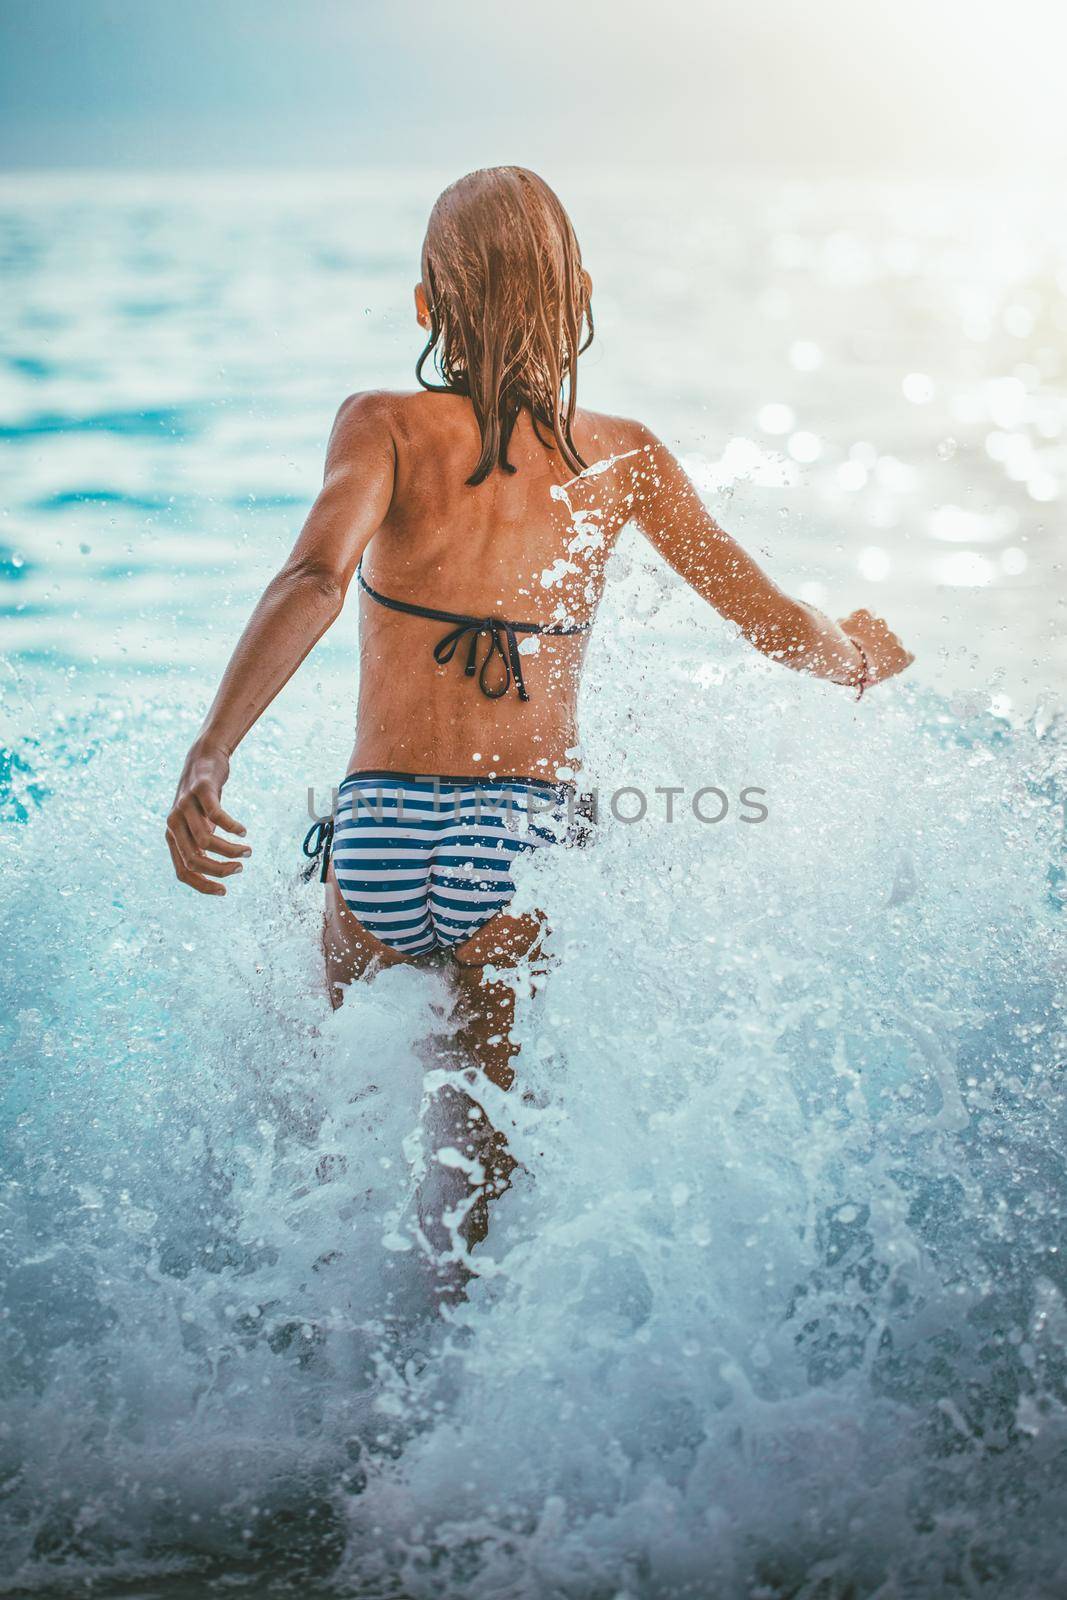 A little girl having fun in the waves of the sea and the drops of water are splashing all over her.
